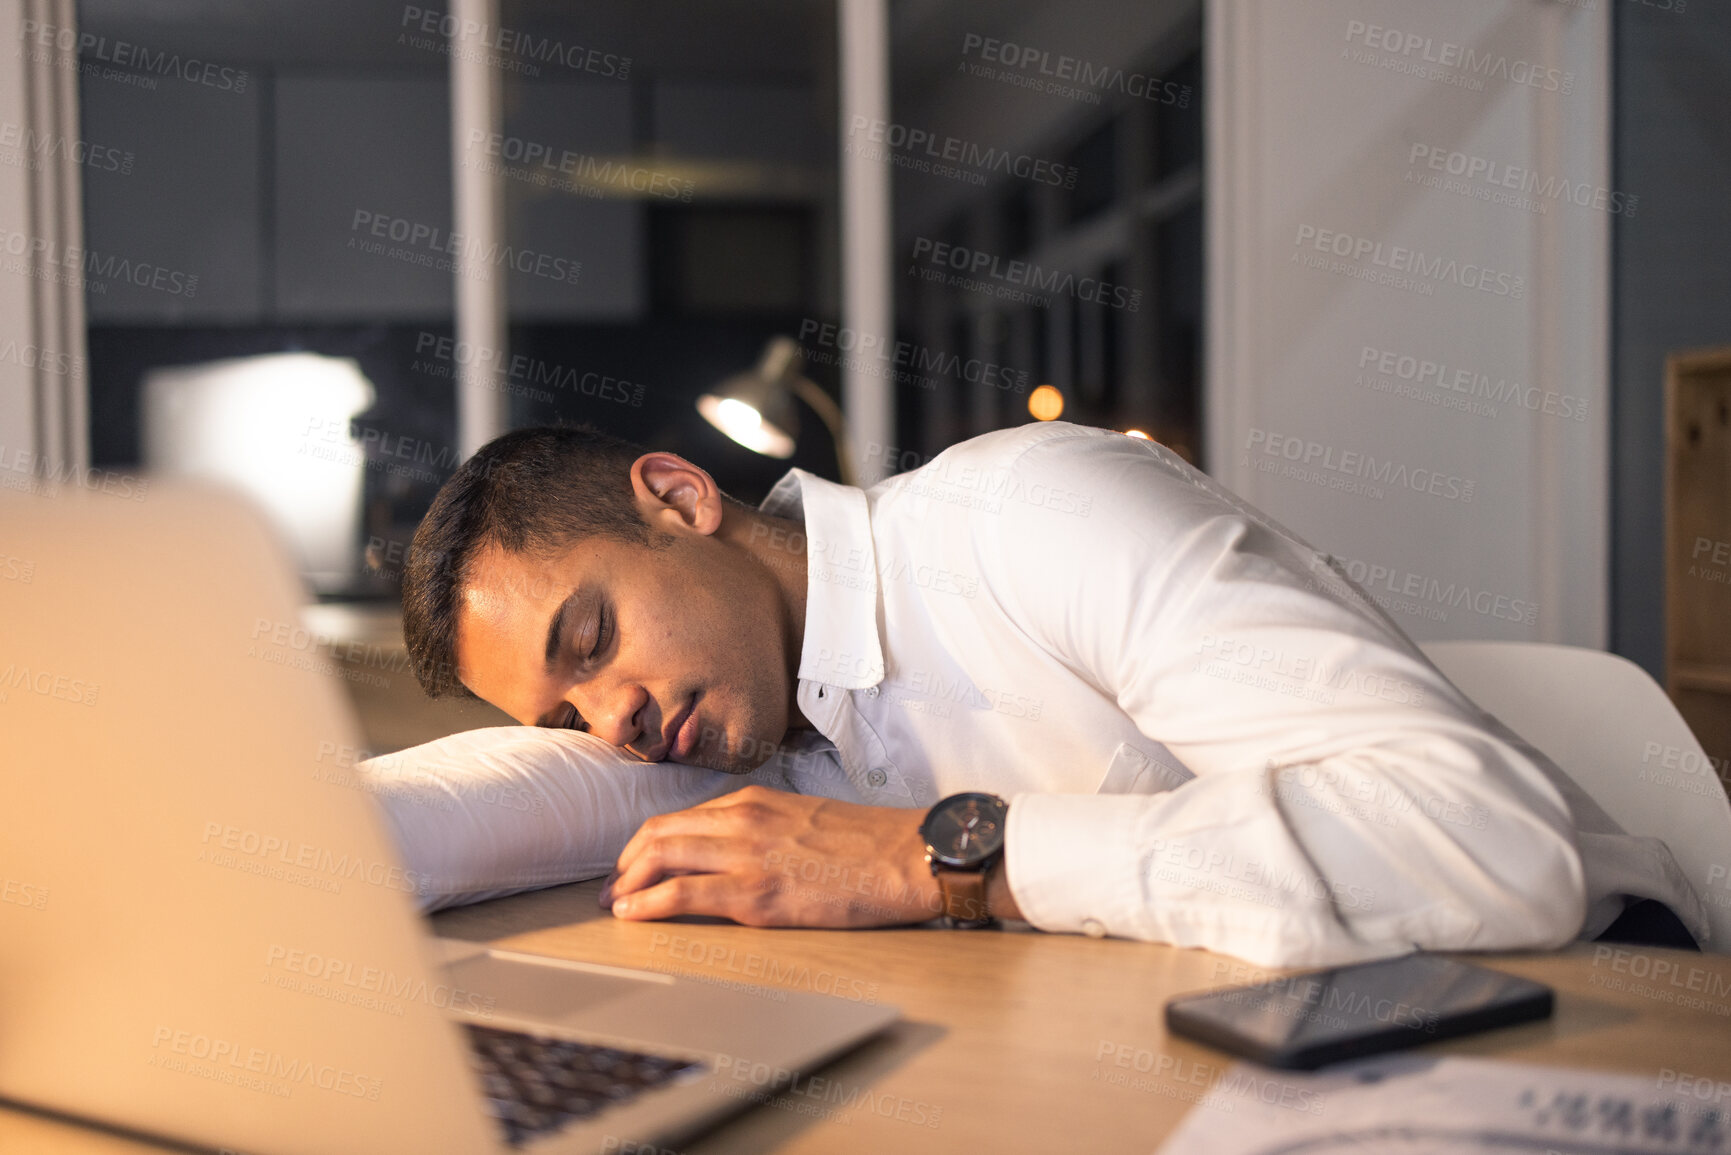 Buy stock photo Work fatigue, business man and sleeping office employee feeling burnout from night deadline. Sleep of a digital finance worker working late on a computer with technology tired of online fintech work